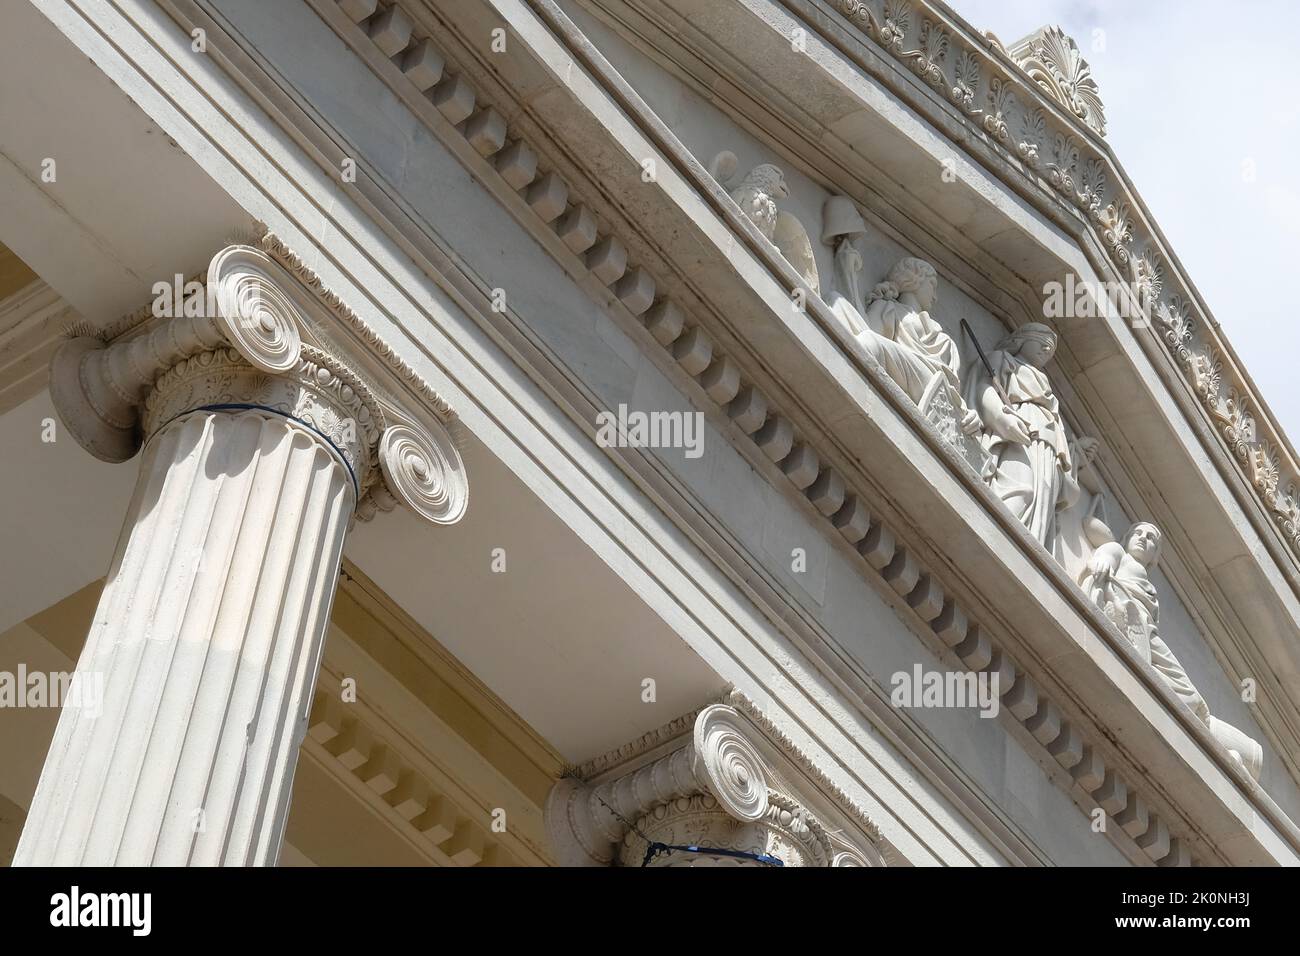 NEW ORLEANS, LA, USA - OCTOBER  8, 2017: Intricate carvings and architectural features at Gallier Hall Stock Photo